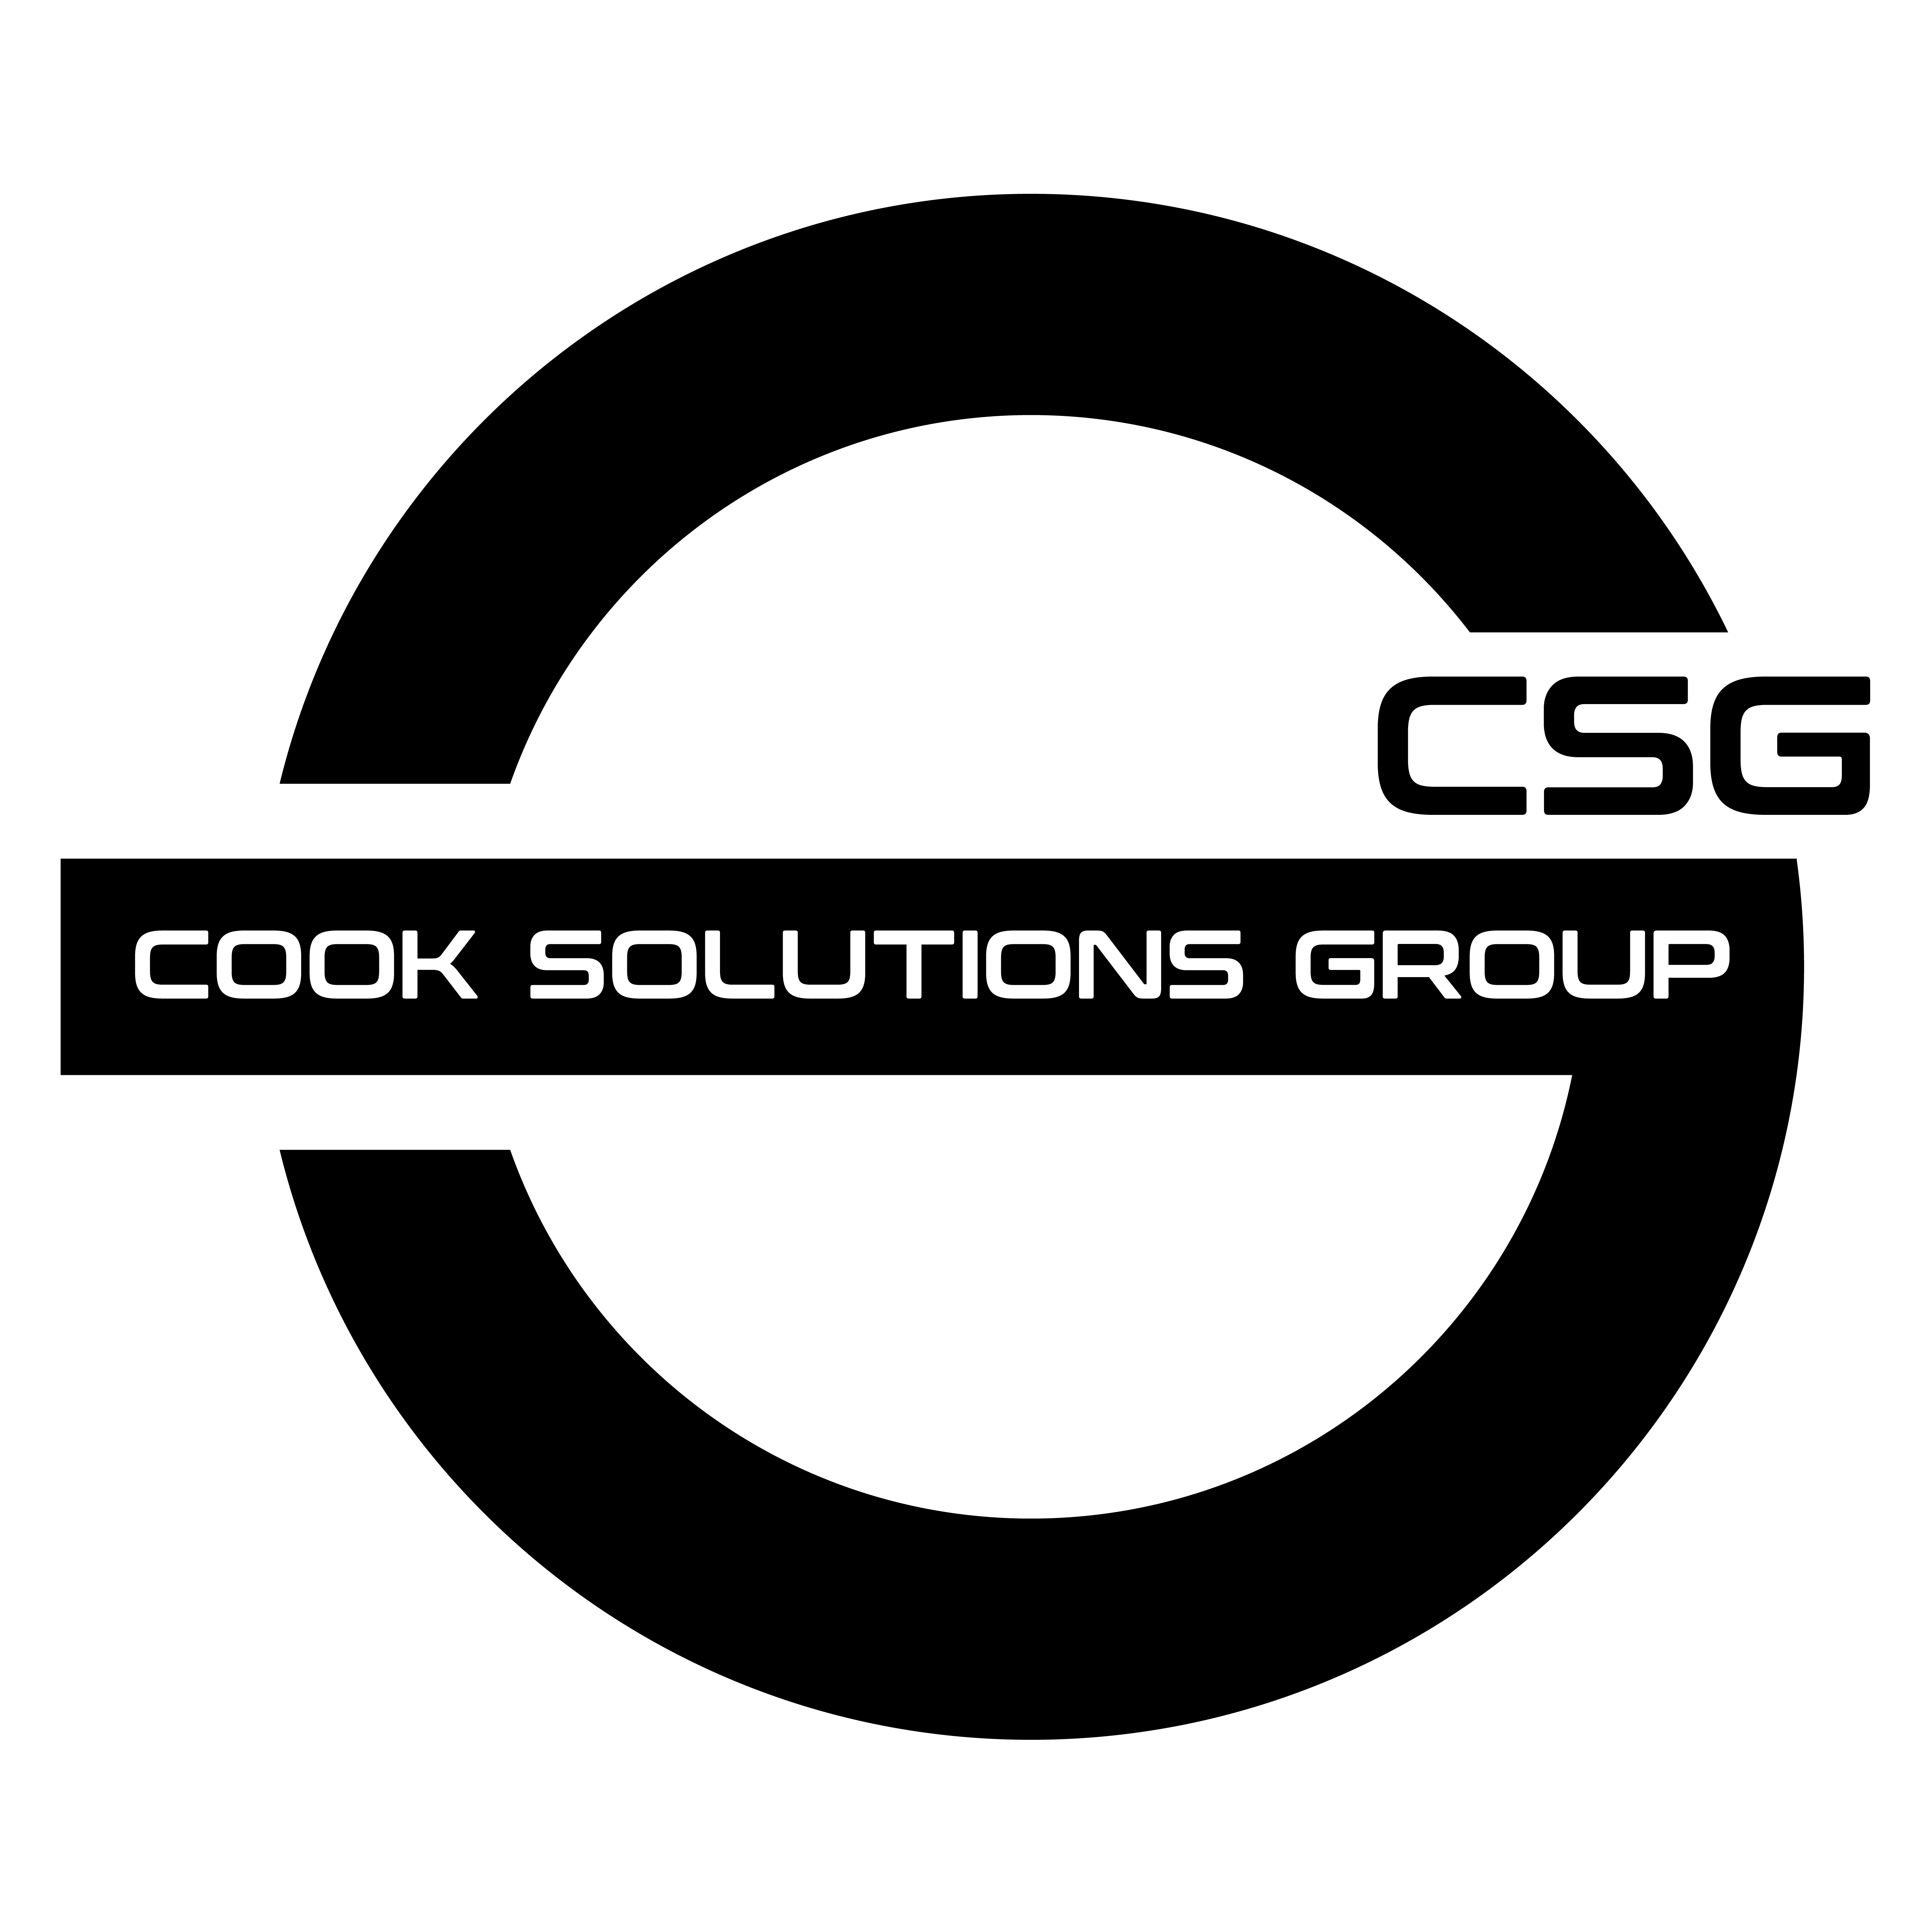 Cook Solutions Group logo